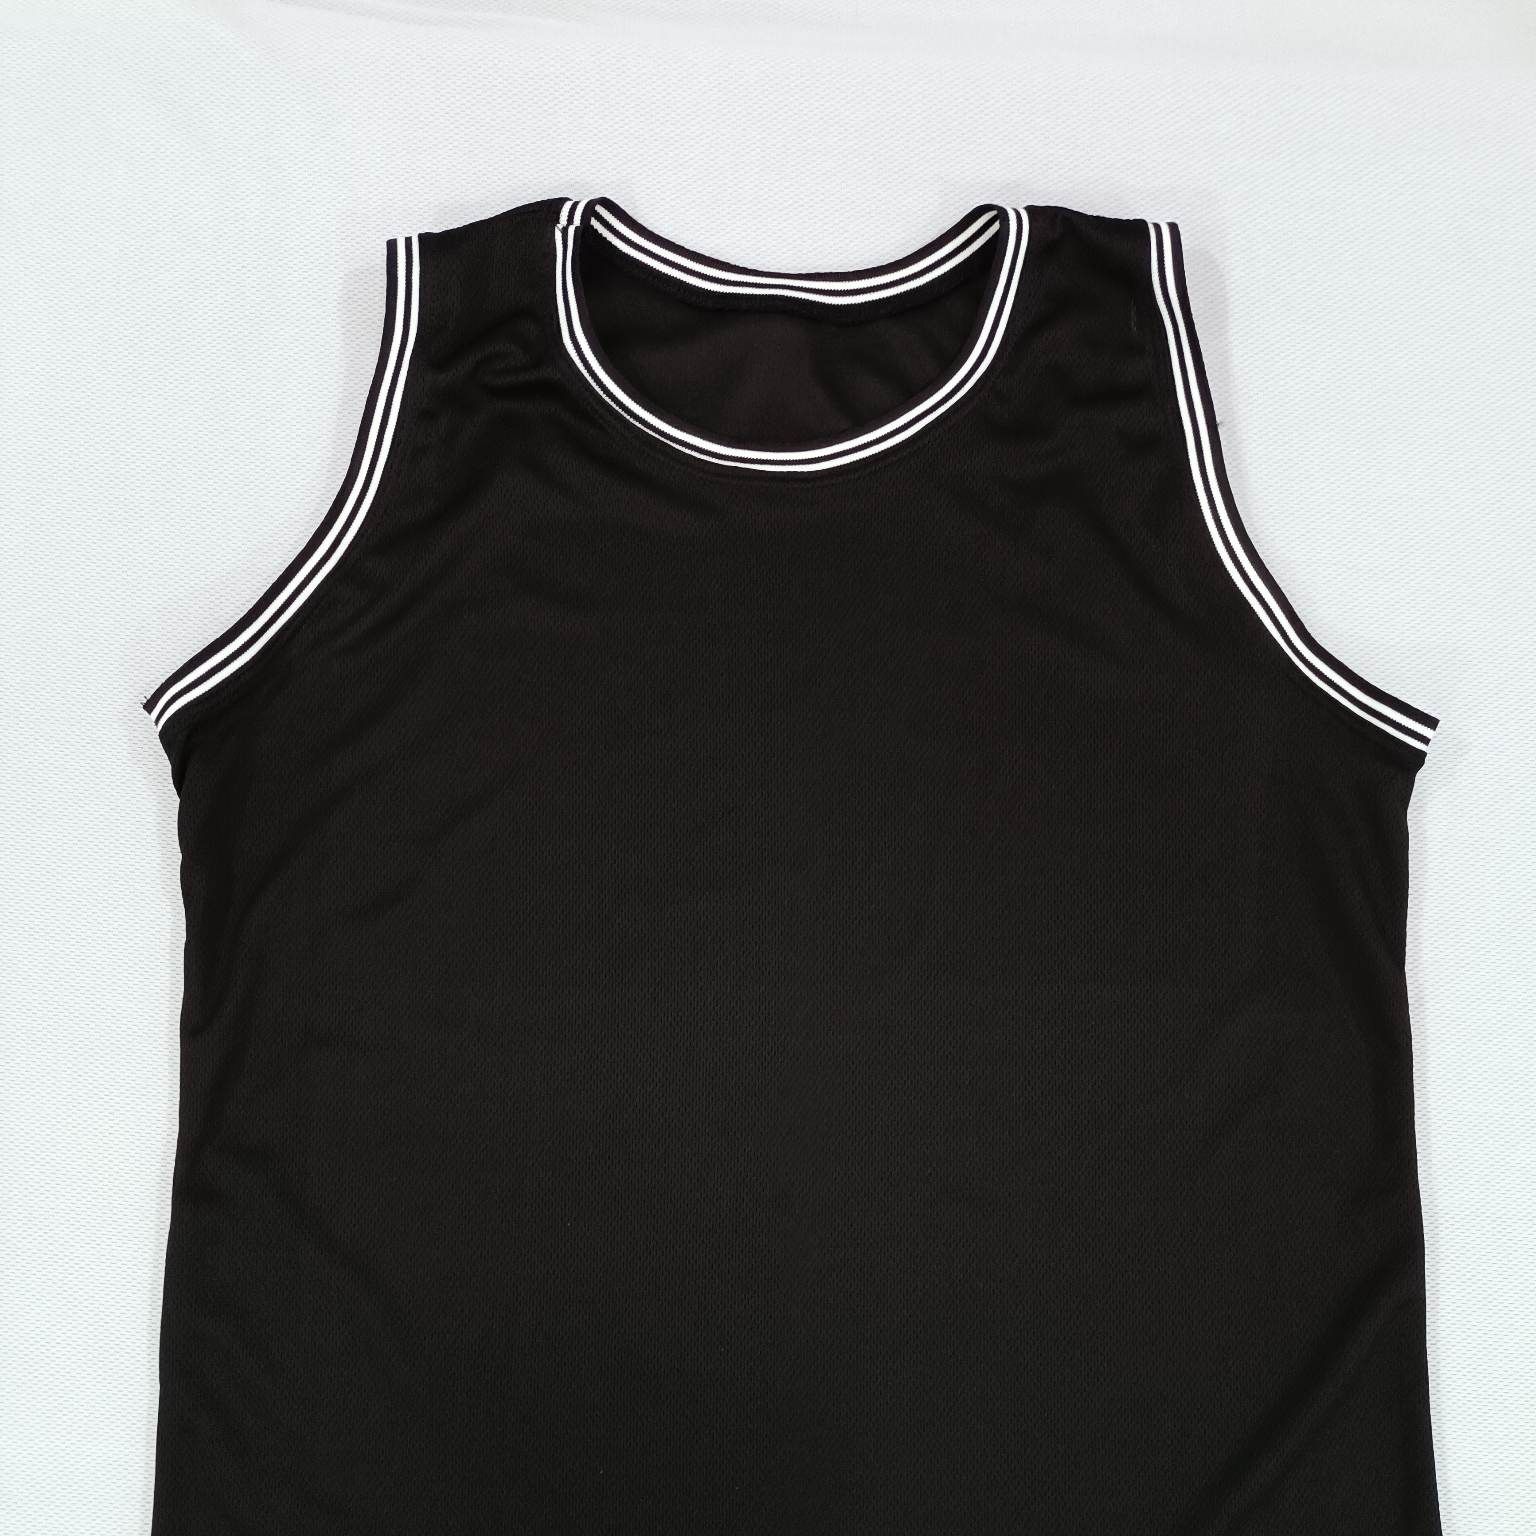 BASKETBALL JERSEY QUICK DRY DRI-fit